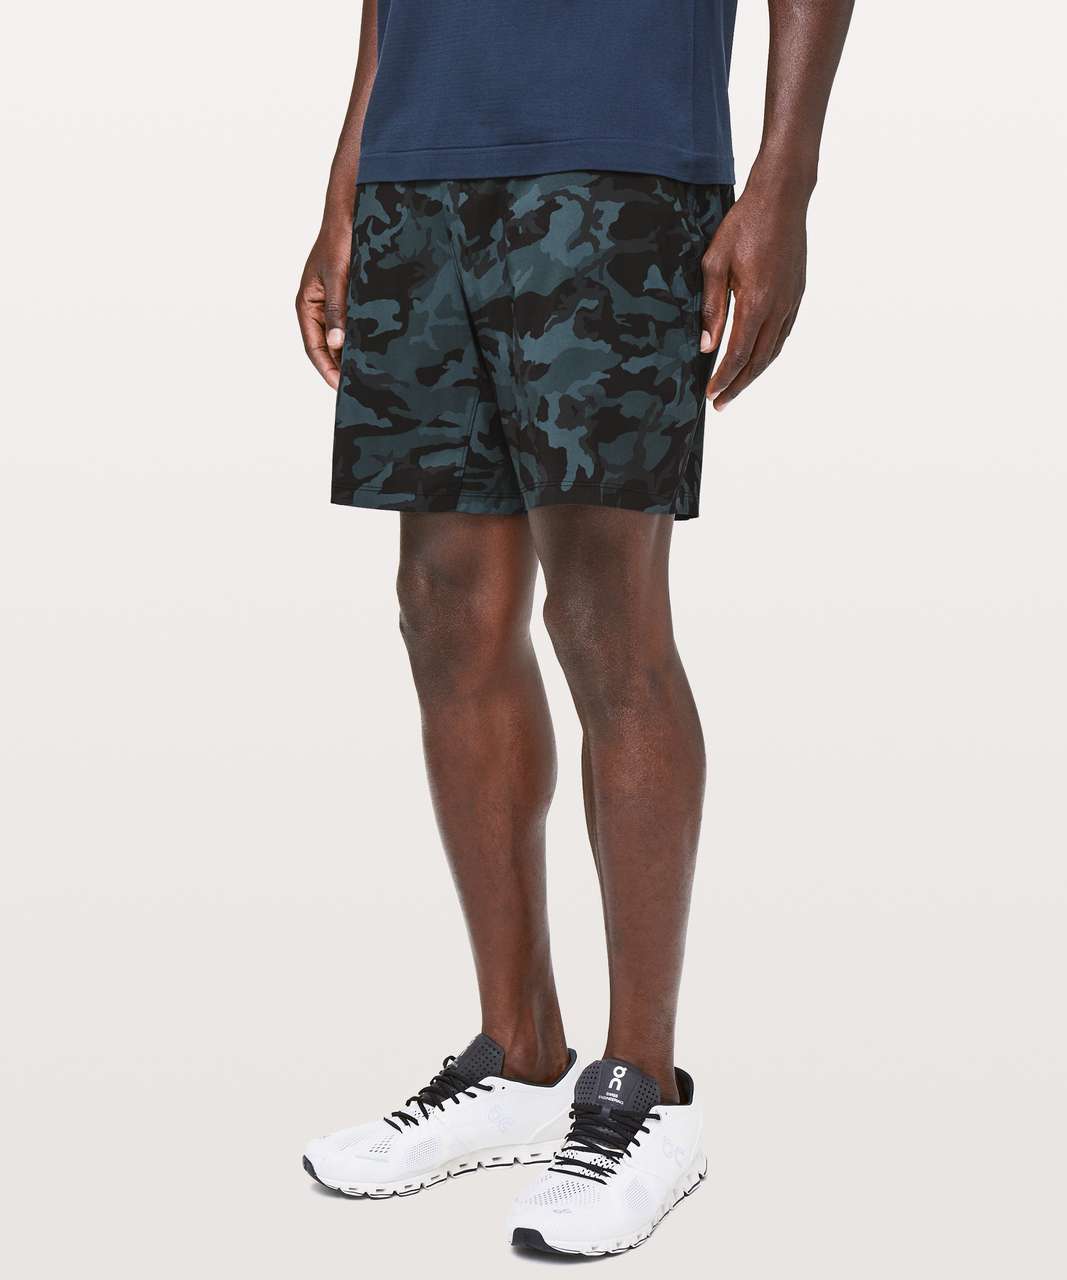 Lululemon Pace Breaker Short *Linerless 7" Updated - Incognito Camo Blue Multi